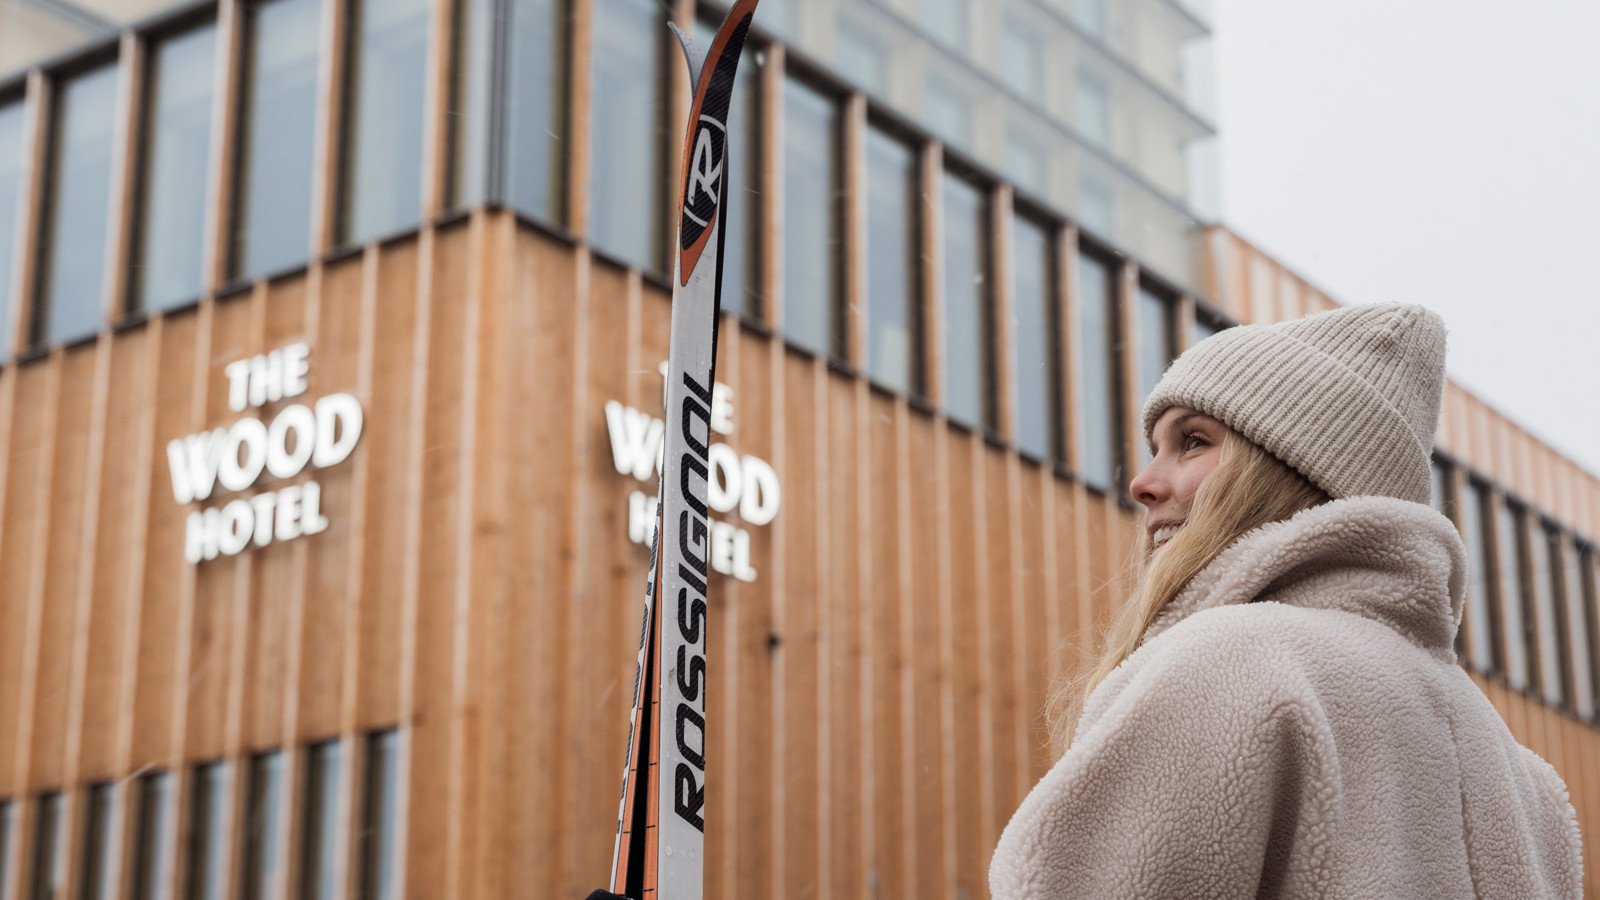 Skier hold on to a pair of cross-country skis standing in front of The Wood Hotel by Elite